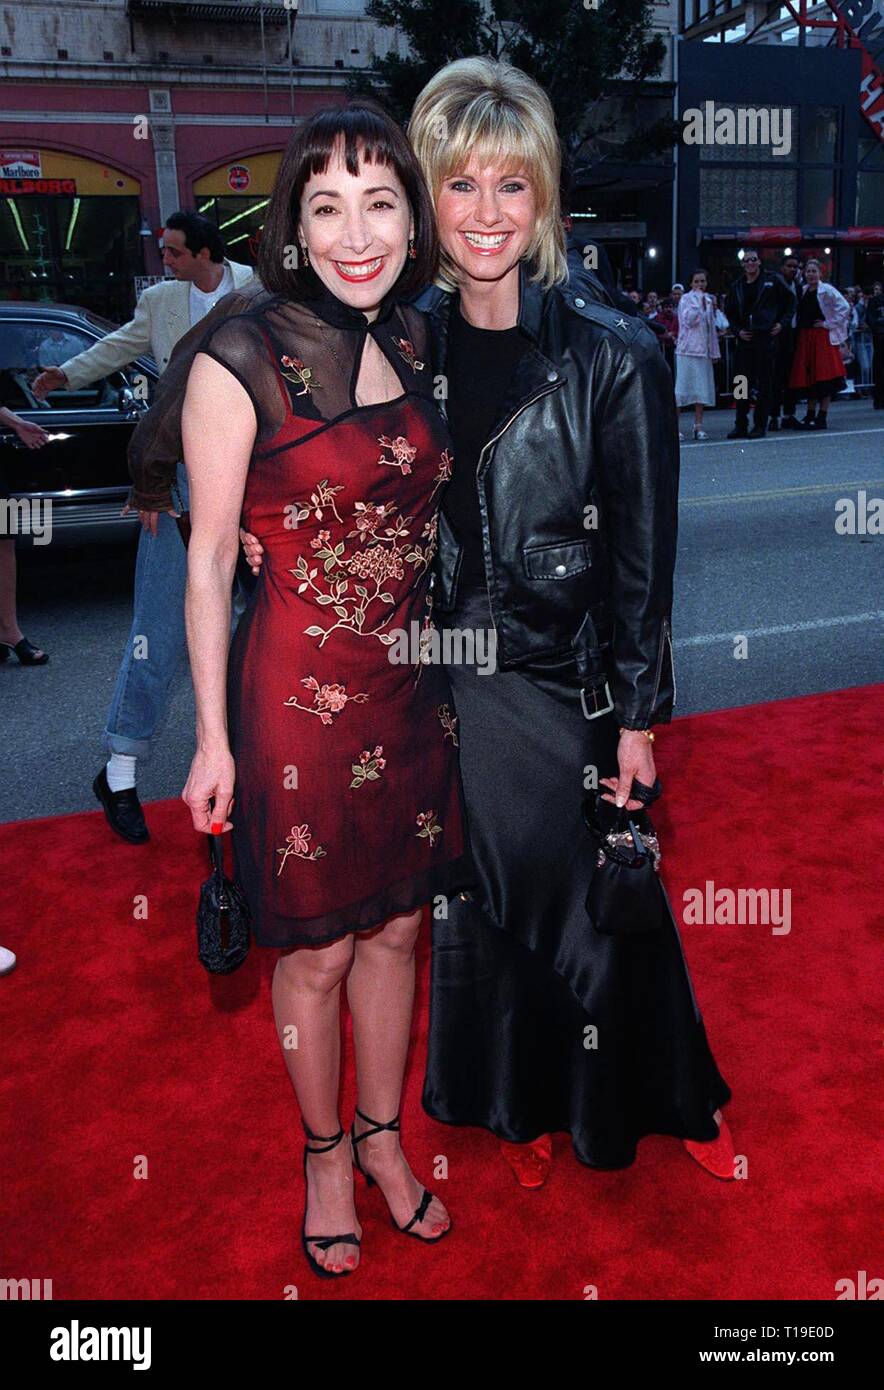 LOS ANGELES, CA - March 15, 1998: 'Grease' stars OLIVIA NEWTON JOHN (right) & DIDI CONN at 20th anniversary re-premiere of 'Grease' at Mann's Chinese Theatre, Hollywood. Stock Photo